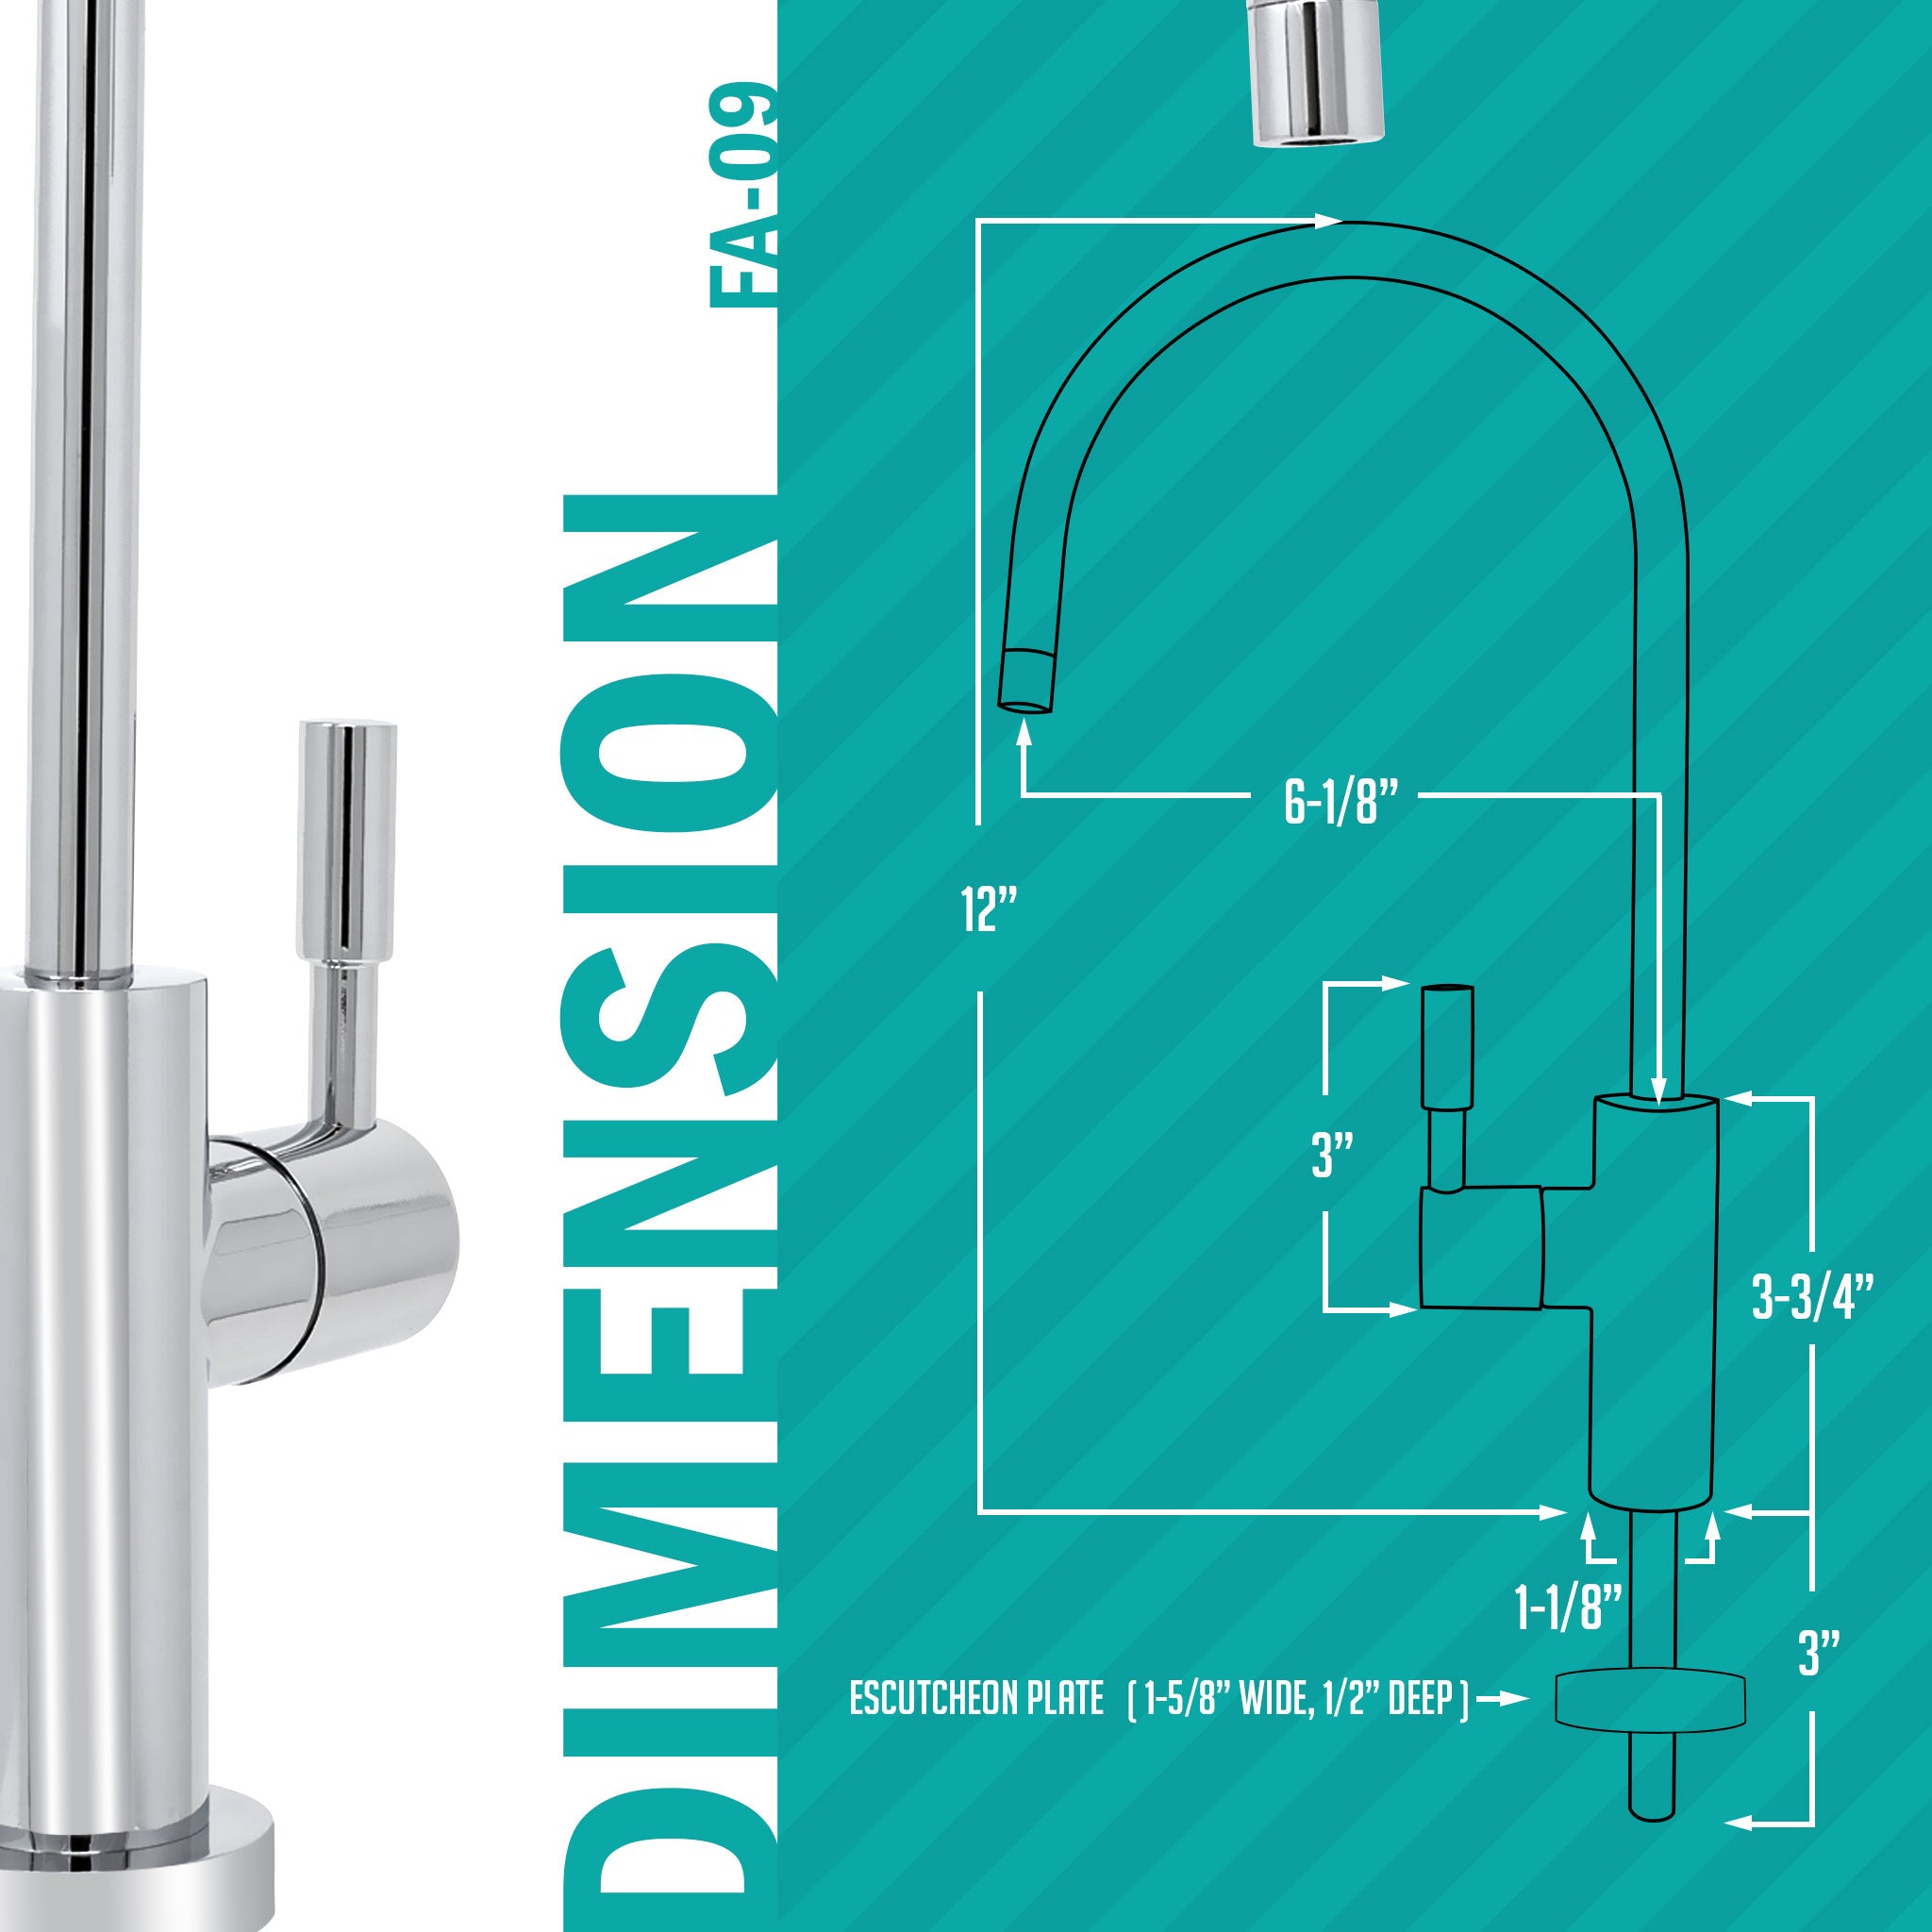 Water Filtration Faucet Antique Brass Large Euro Style Reverse Osmosis Non Air Gap. Certified by NSF.